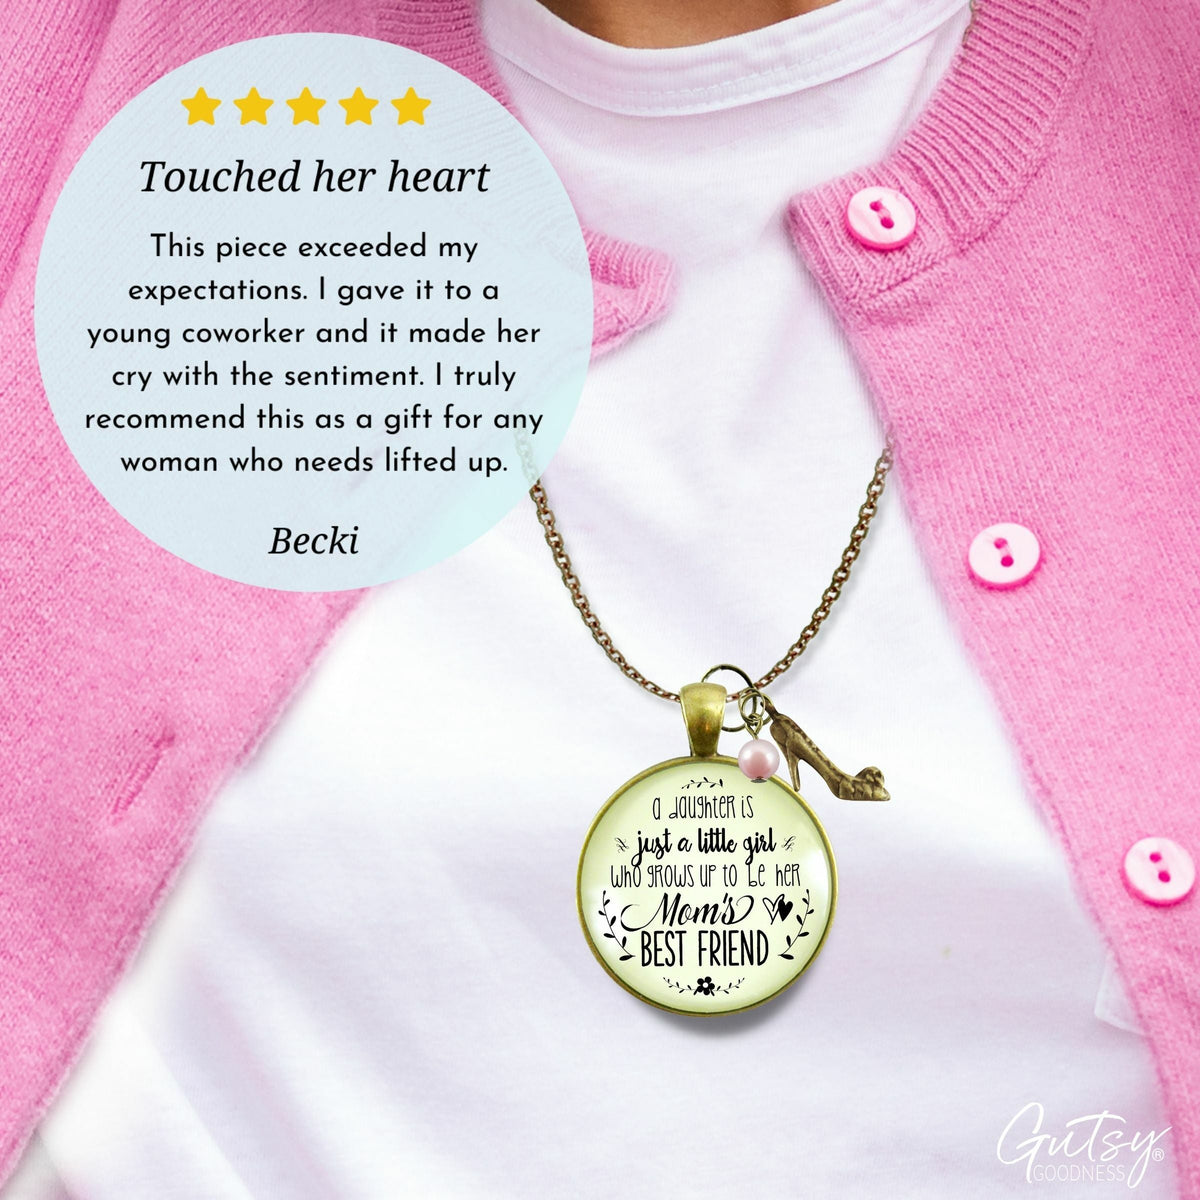 Gutsy Goodness Mother Daughter Necklace She Grows Up To Be Mom's Best Friend Jewelry Gift - Gutsy Goodness Handmade Jewelry;A Daughter Is Just A Little Girl - High Heel - Pink Pearl - Gutsy Goodness Handmade Jewelry Gifts